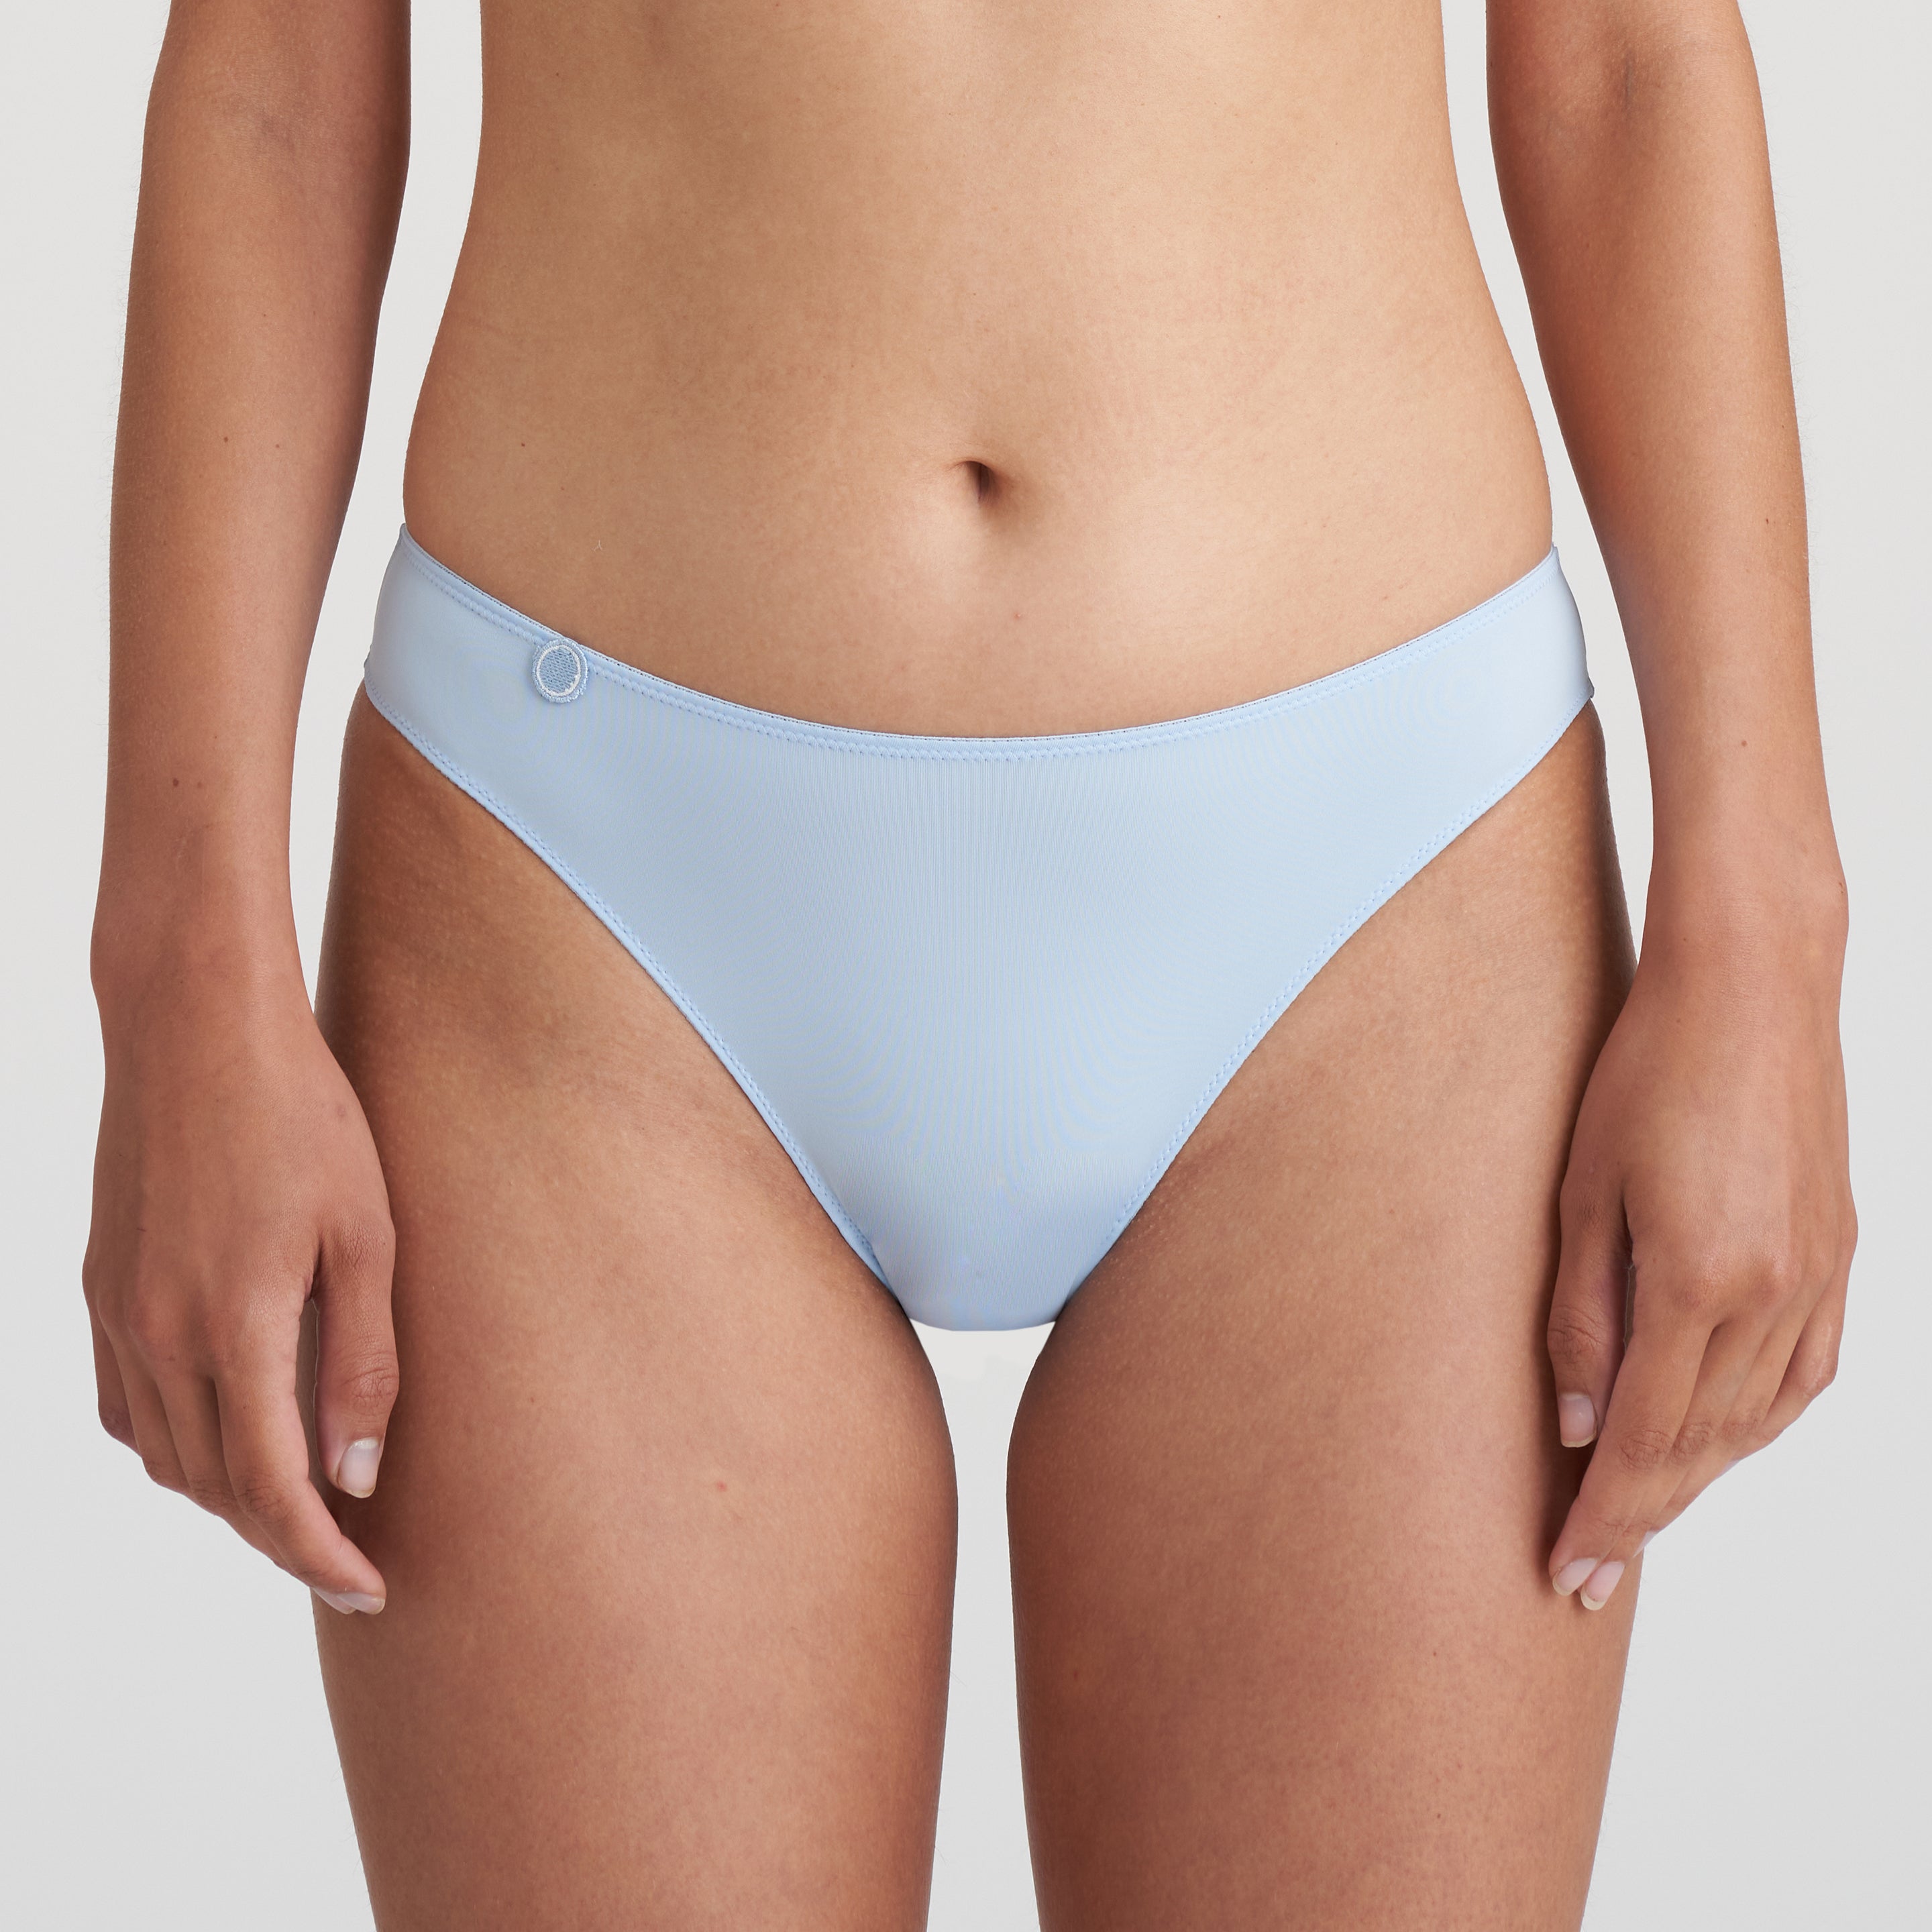 Mario Jo Tom Rio Briefs - Cloud Blue (Limited Edition) – Lily Pad Lingerie